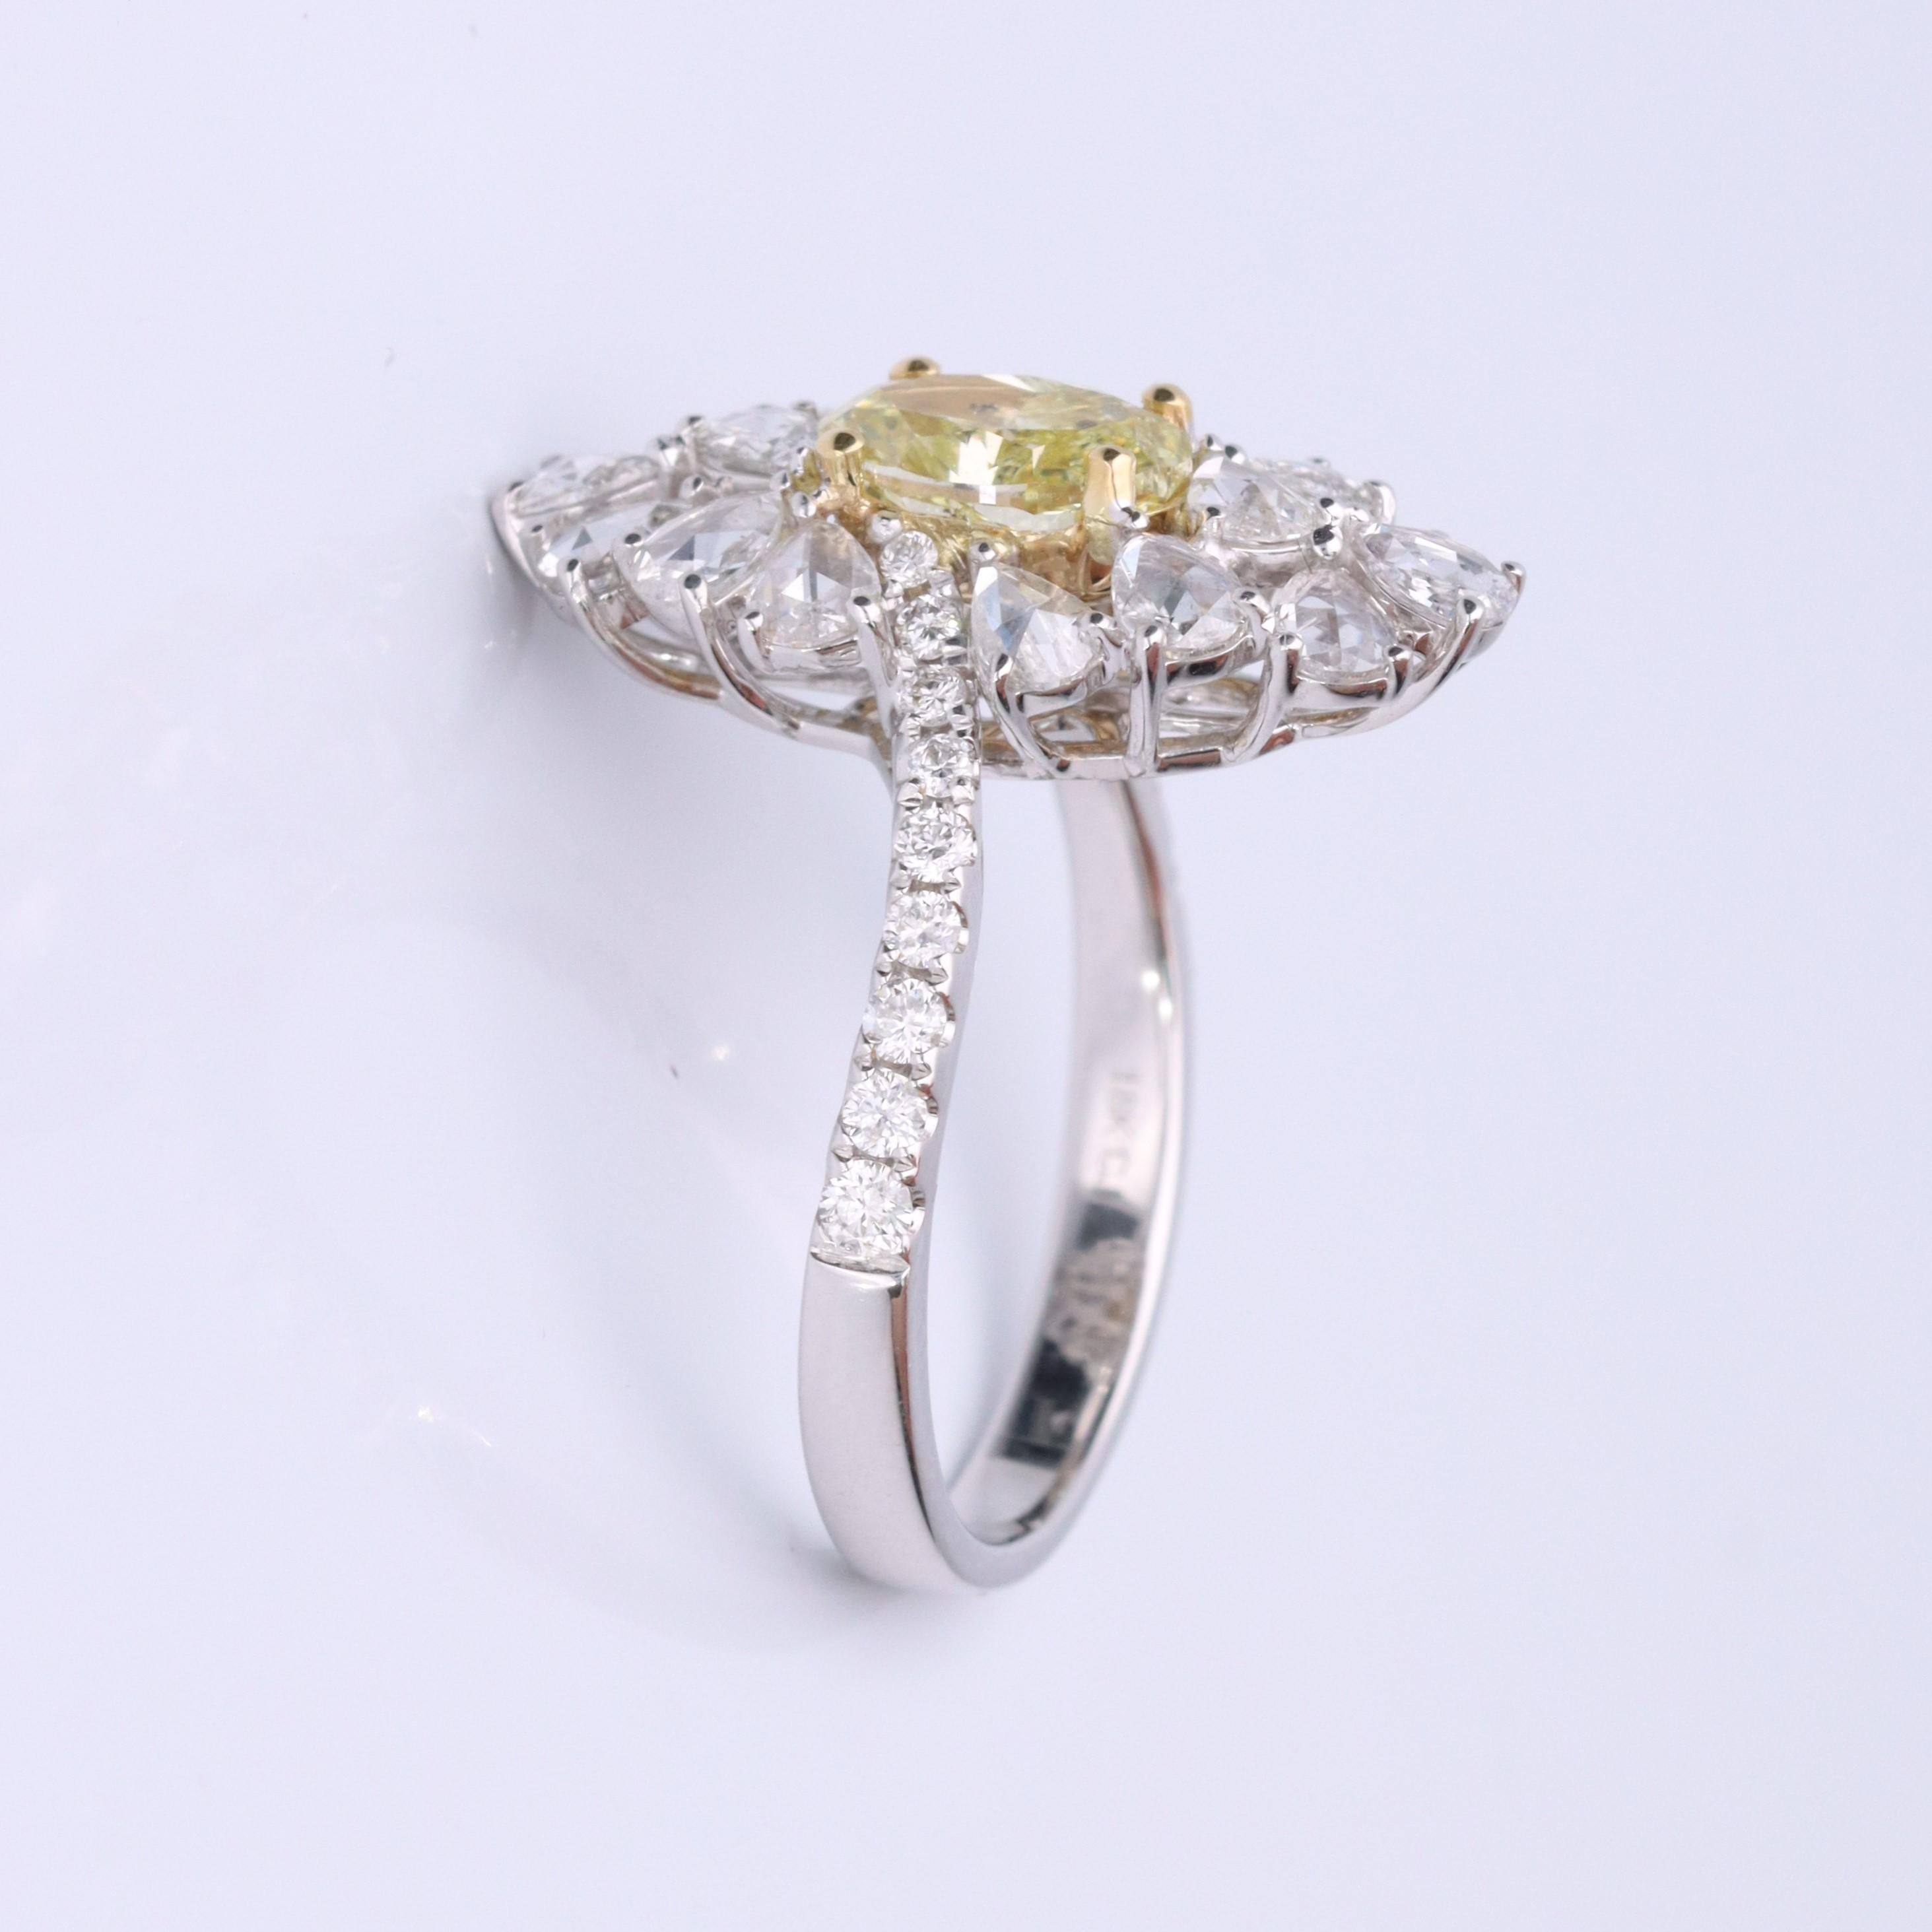 Stunning, timeless and classy eternity Unique Ring. Decorate yourself in luxury with this Gin & Grace Ring. The 18K Two Tone Gold jewelry boasts with Oval-cut 1 pcs  1.24 carat, Rose-cut 16 pcs 1.14 carat White Diamond and Natural Round-cut white